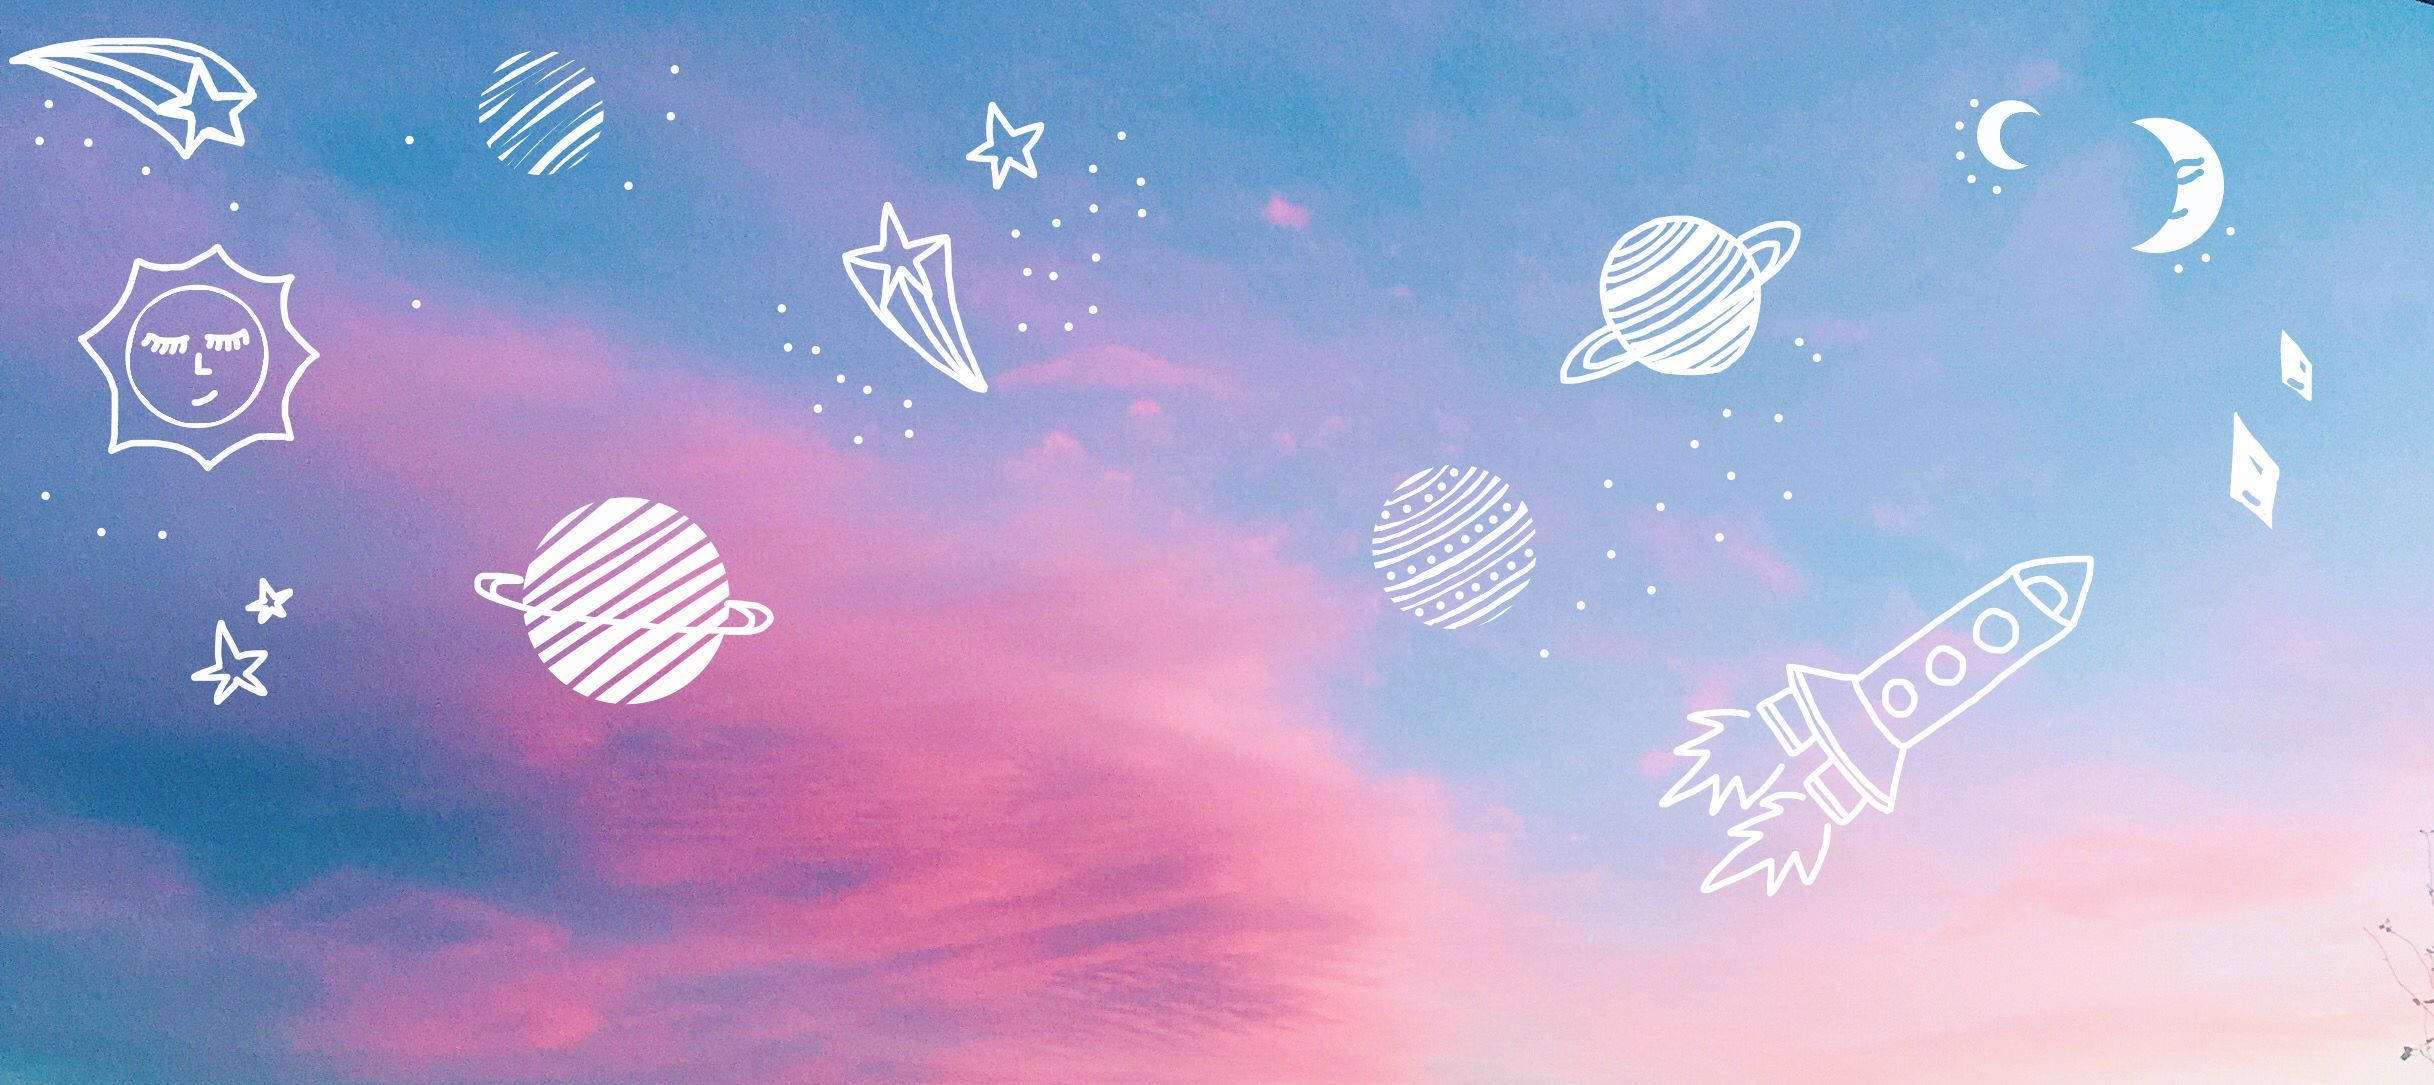 Download Aesthetic Youtube Planets Doodle Art Wallpaper